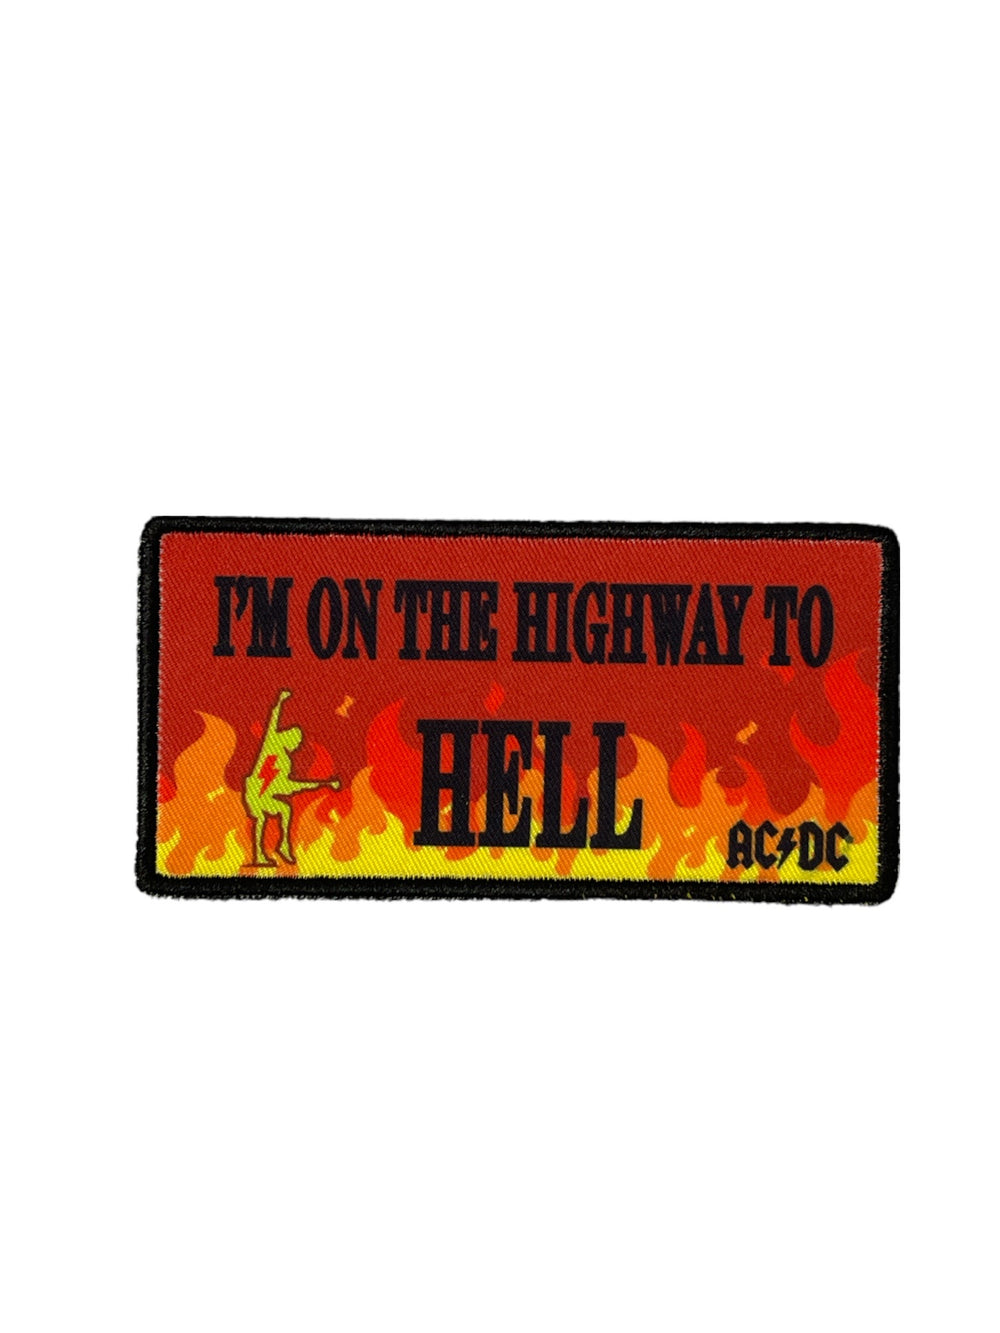 AC/DC Standard Patch: Highway To Hell Flames Official Woven Patch Brand New